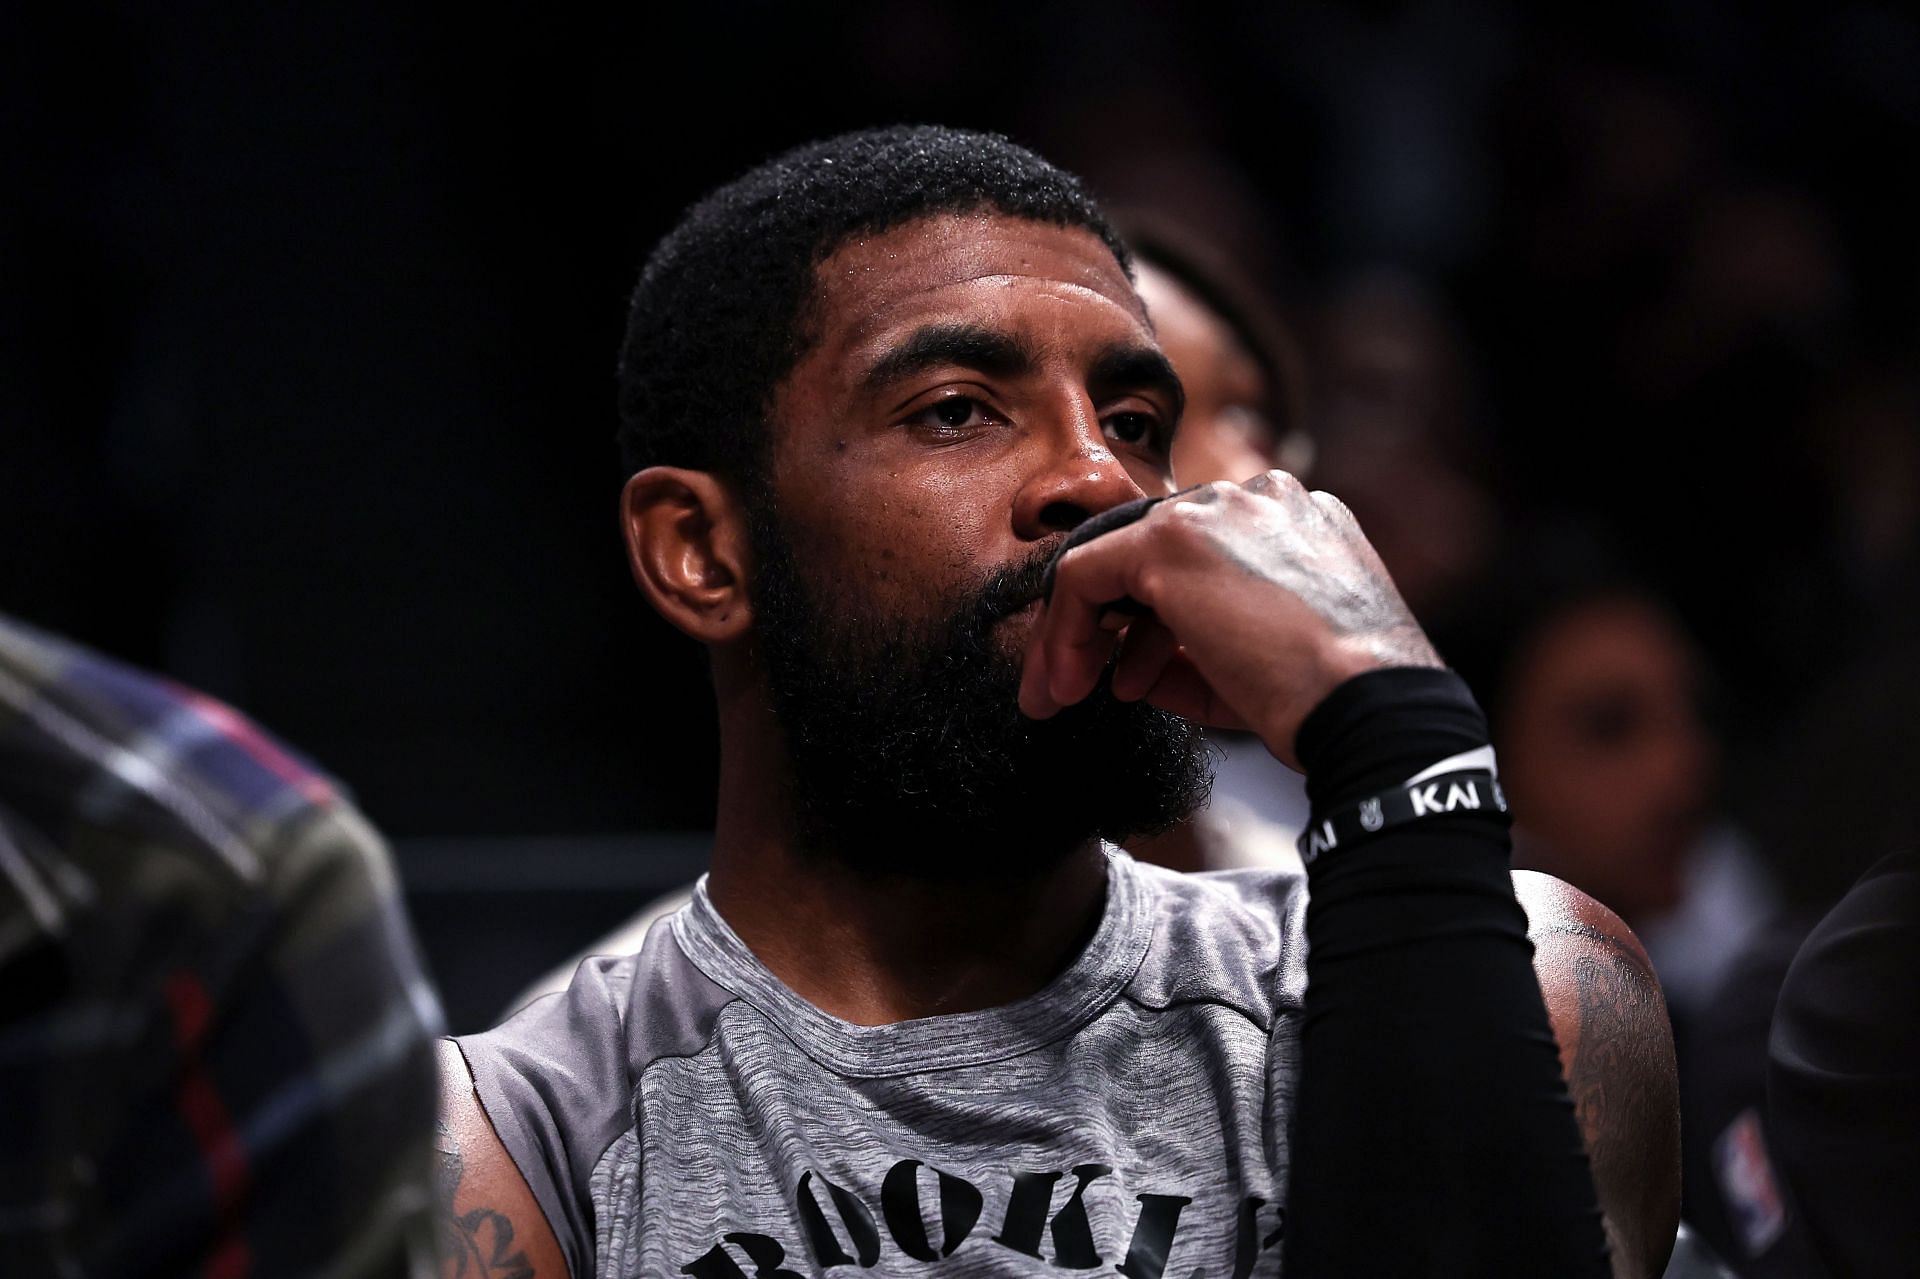 Kyrie Irving continues to be a highly-divisive figure in the NBA.